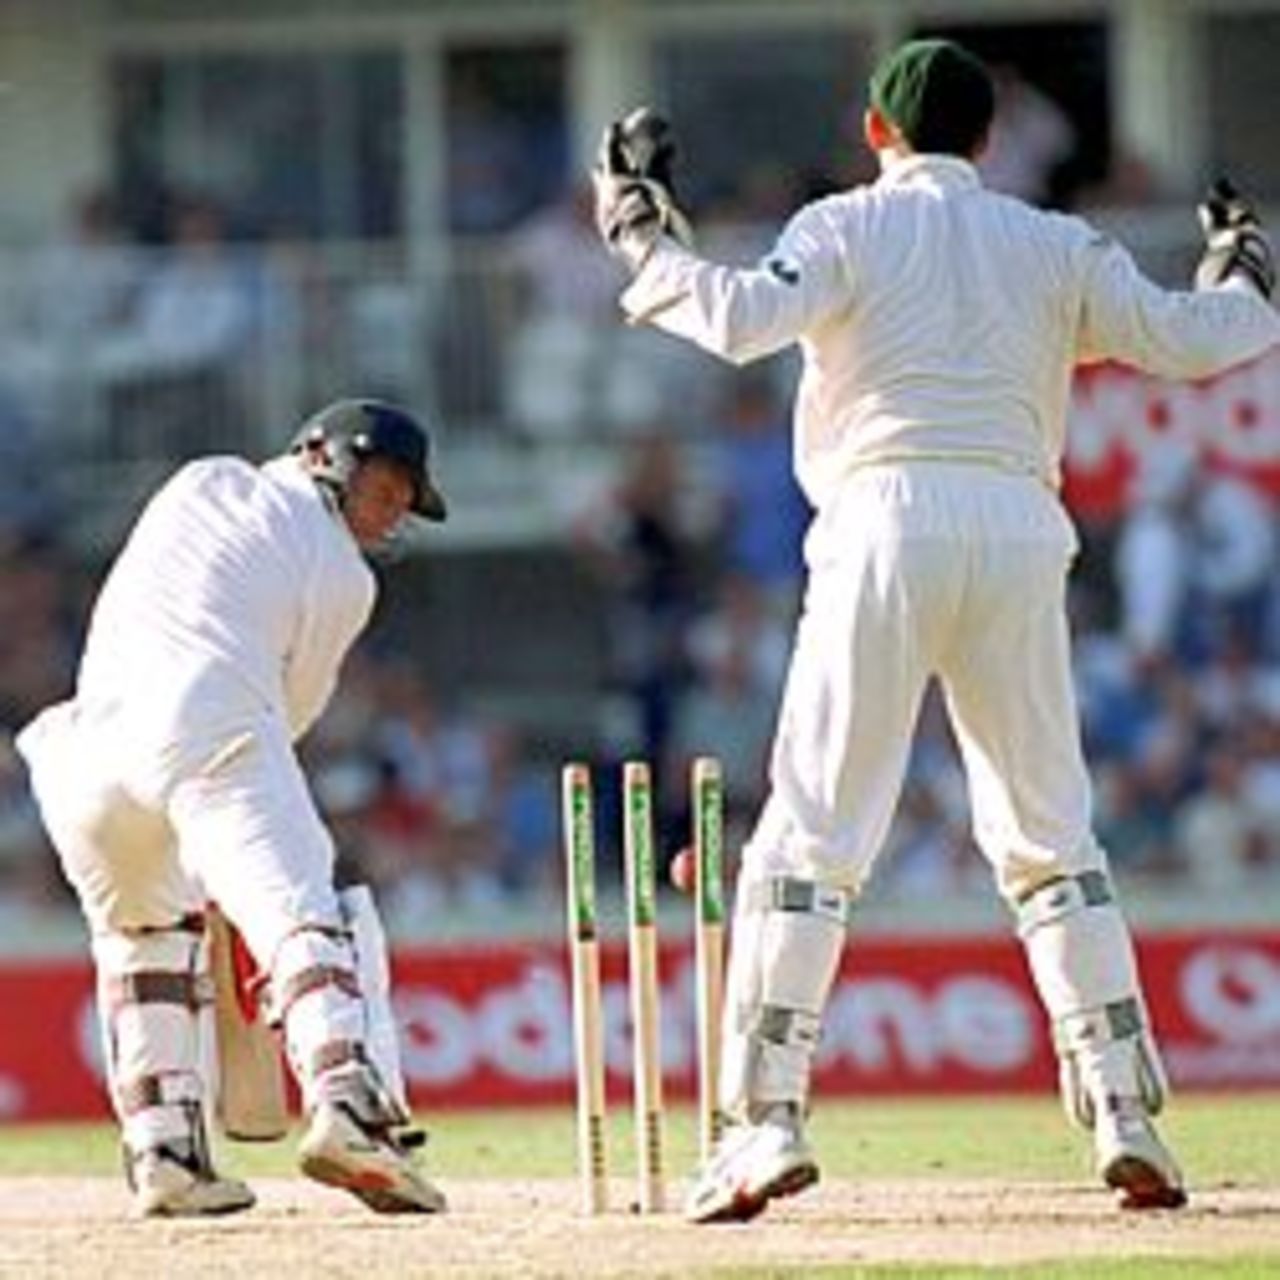 Michael Atherton of England is bowled for 13 by Shane Warne of Australia during the 2nd day of the 5th Ashes Test between England and Australia at The AMP Oval, London.